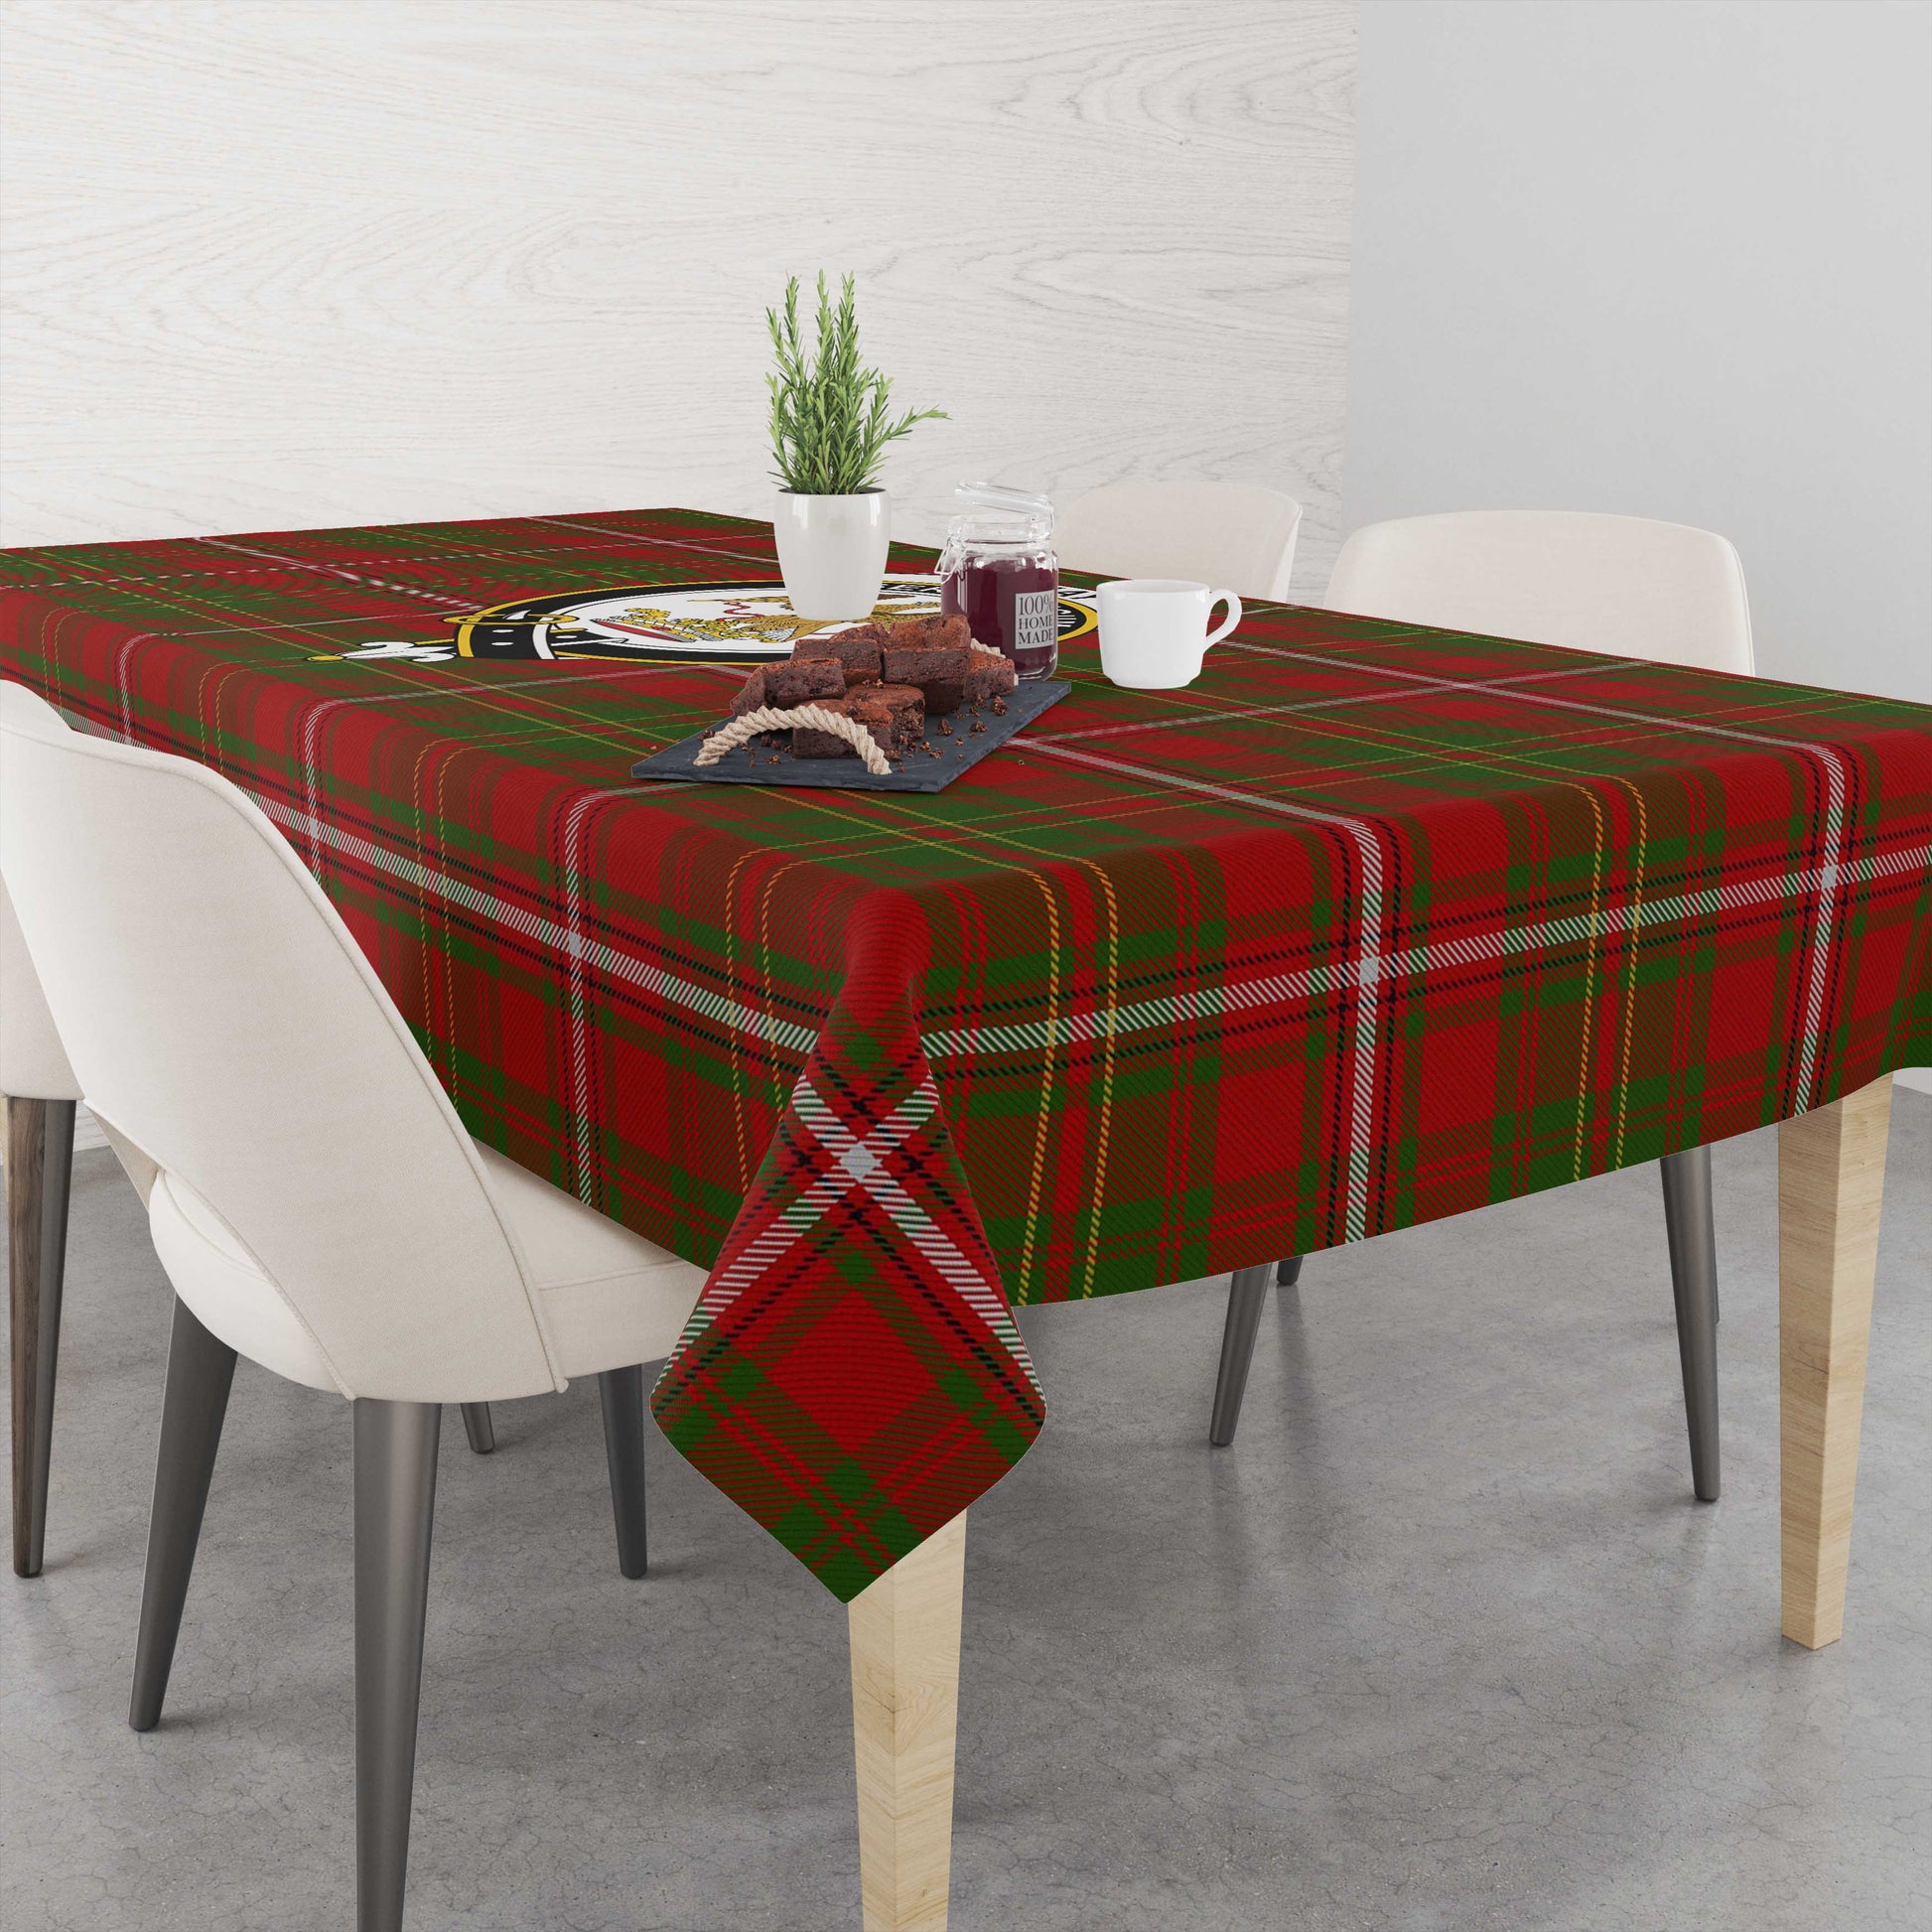 hay-tatan-tablecloth-with-family-crest